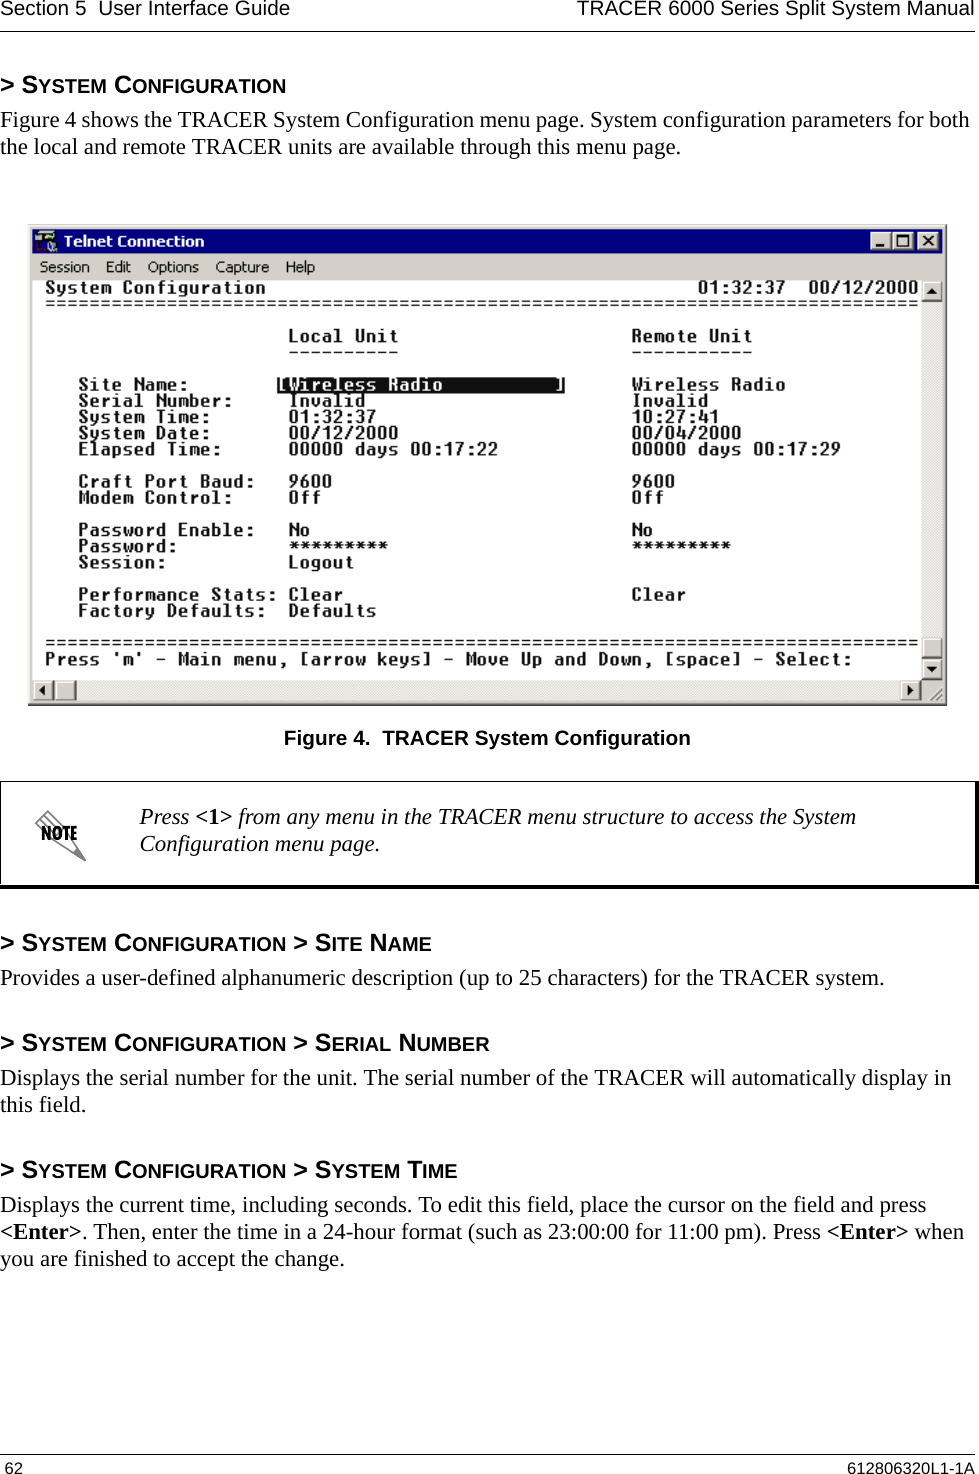 Section 5  User Interface Guide TRACER 6000 Series Split System Manual 62 612806320L1-1A&gt; SYSTEM CONFIGURATIONFigure 4 shows the TRACER System Configuration menu page. System configuration parameters for both the local and remote TRACER units are available through this menu page.Figure 4.  TRACER System Configuration&gt; SYSTEM CONFIGURATION &gt; SITE NAMEProvides a user-defined alphanumeric description (up to 25 characters) for the TRACER system.&gt; SYSTEM CONFIGURATION &gt; SERIAL NUMBERDisplays the serial number for the unit. The serial number of the TRACER will automatically display in this field.&gt; SYSTEM CONFIGURATION &gt; SYSTEM TIMEDisplays the current time, including seconds. To edit this field, place the cursor on the field and press &lt;Enter&gt;. Then, enter the time in a 24-hour format (such as 23:00:00 for 11:00 pm). Press &lt;Enter&gt; when you are finished to accept the change. Press &lt;1&gt; from any menu in the TRACER menu structure to access the System Configuration menu page.